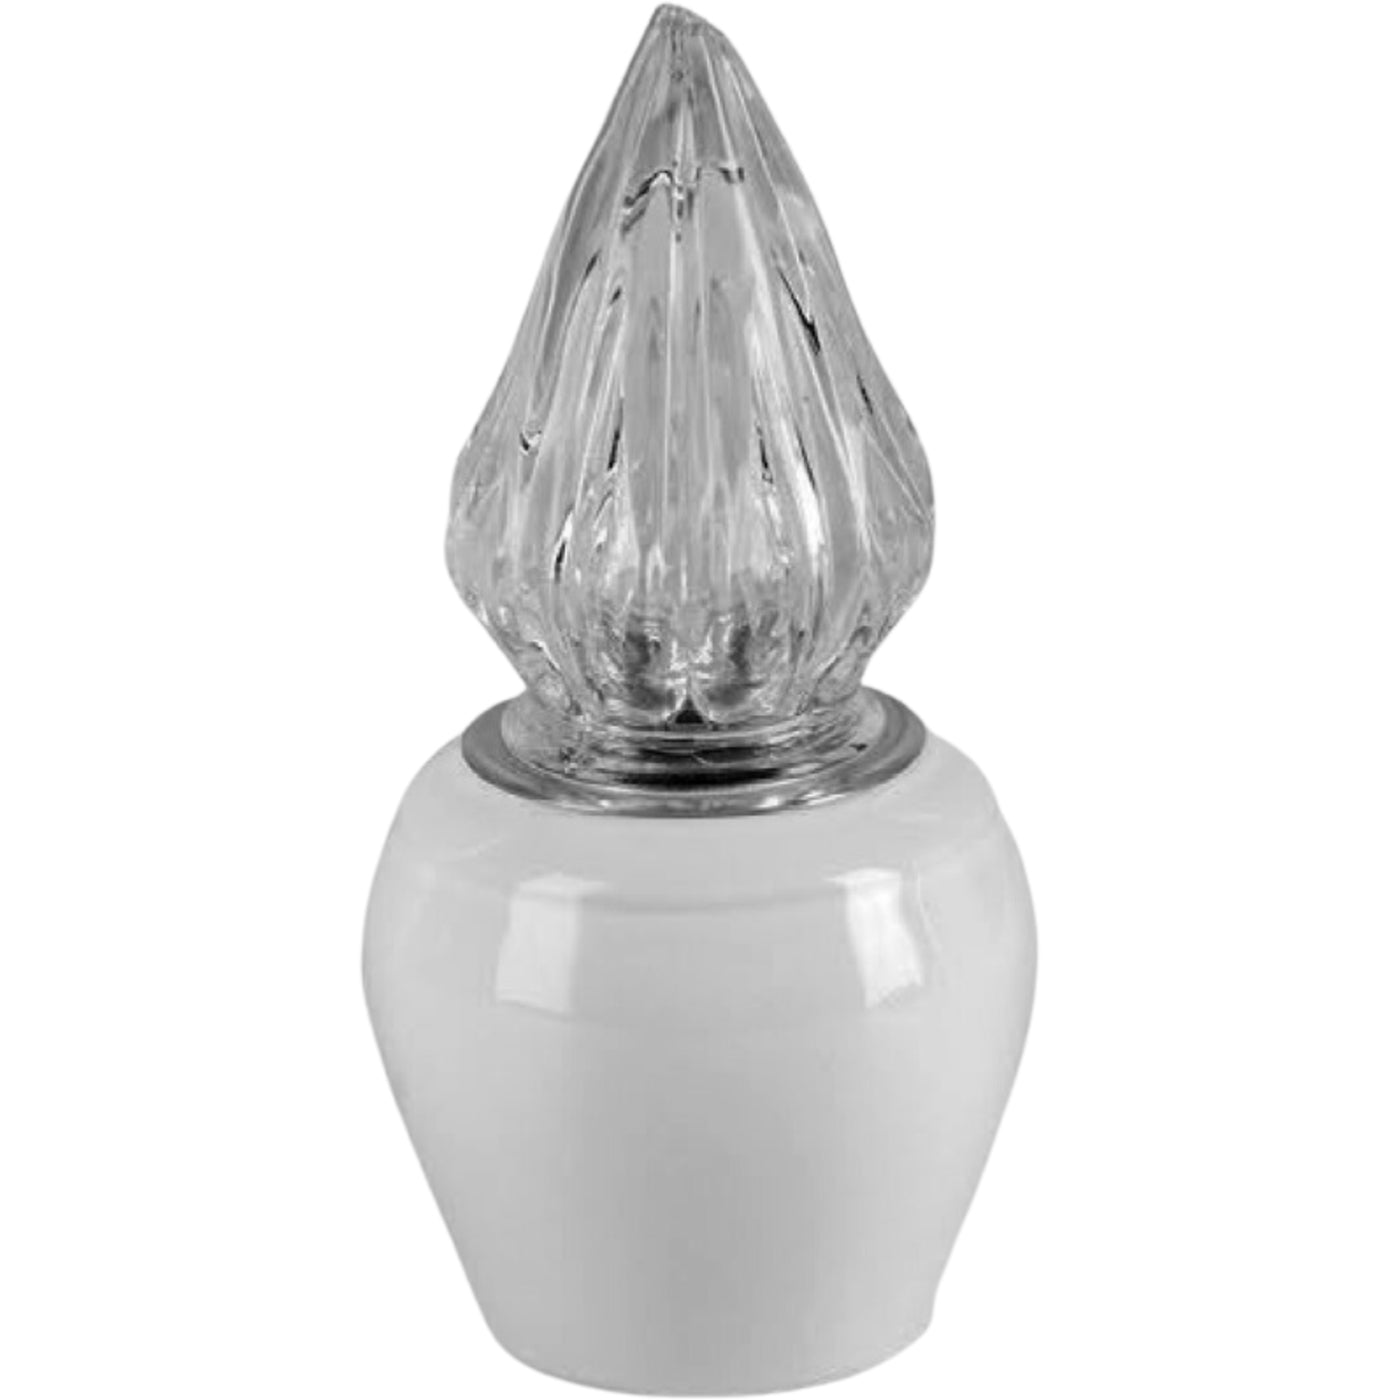 Grave light Liscia 10x10cm - 3.9x3.9in In white porcelain, ground attached LI146T